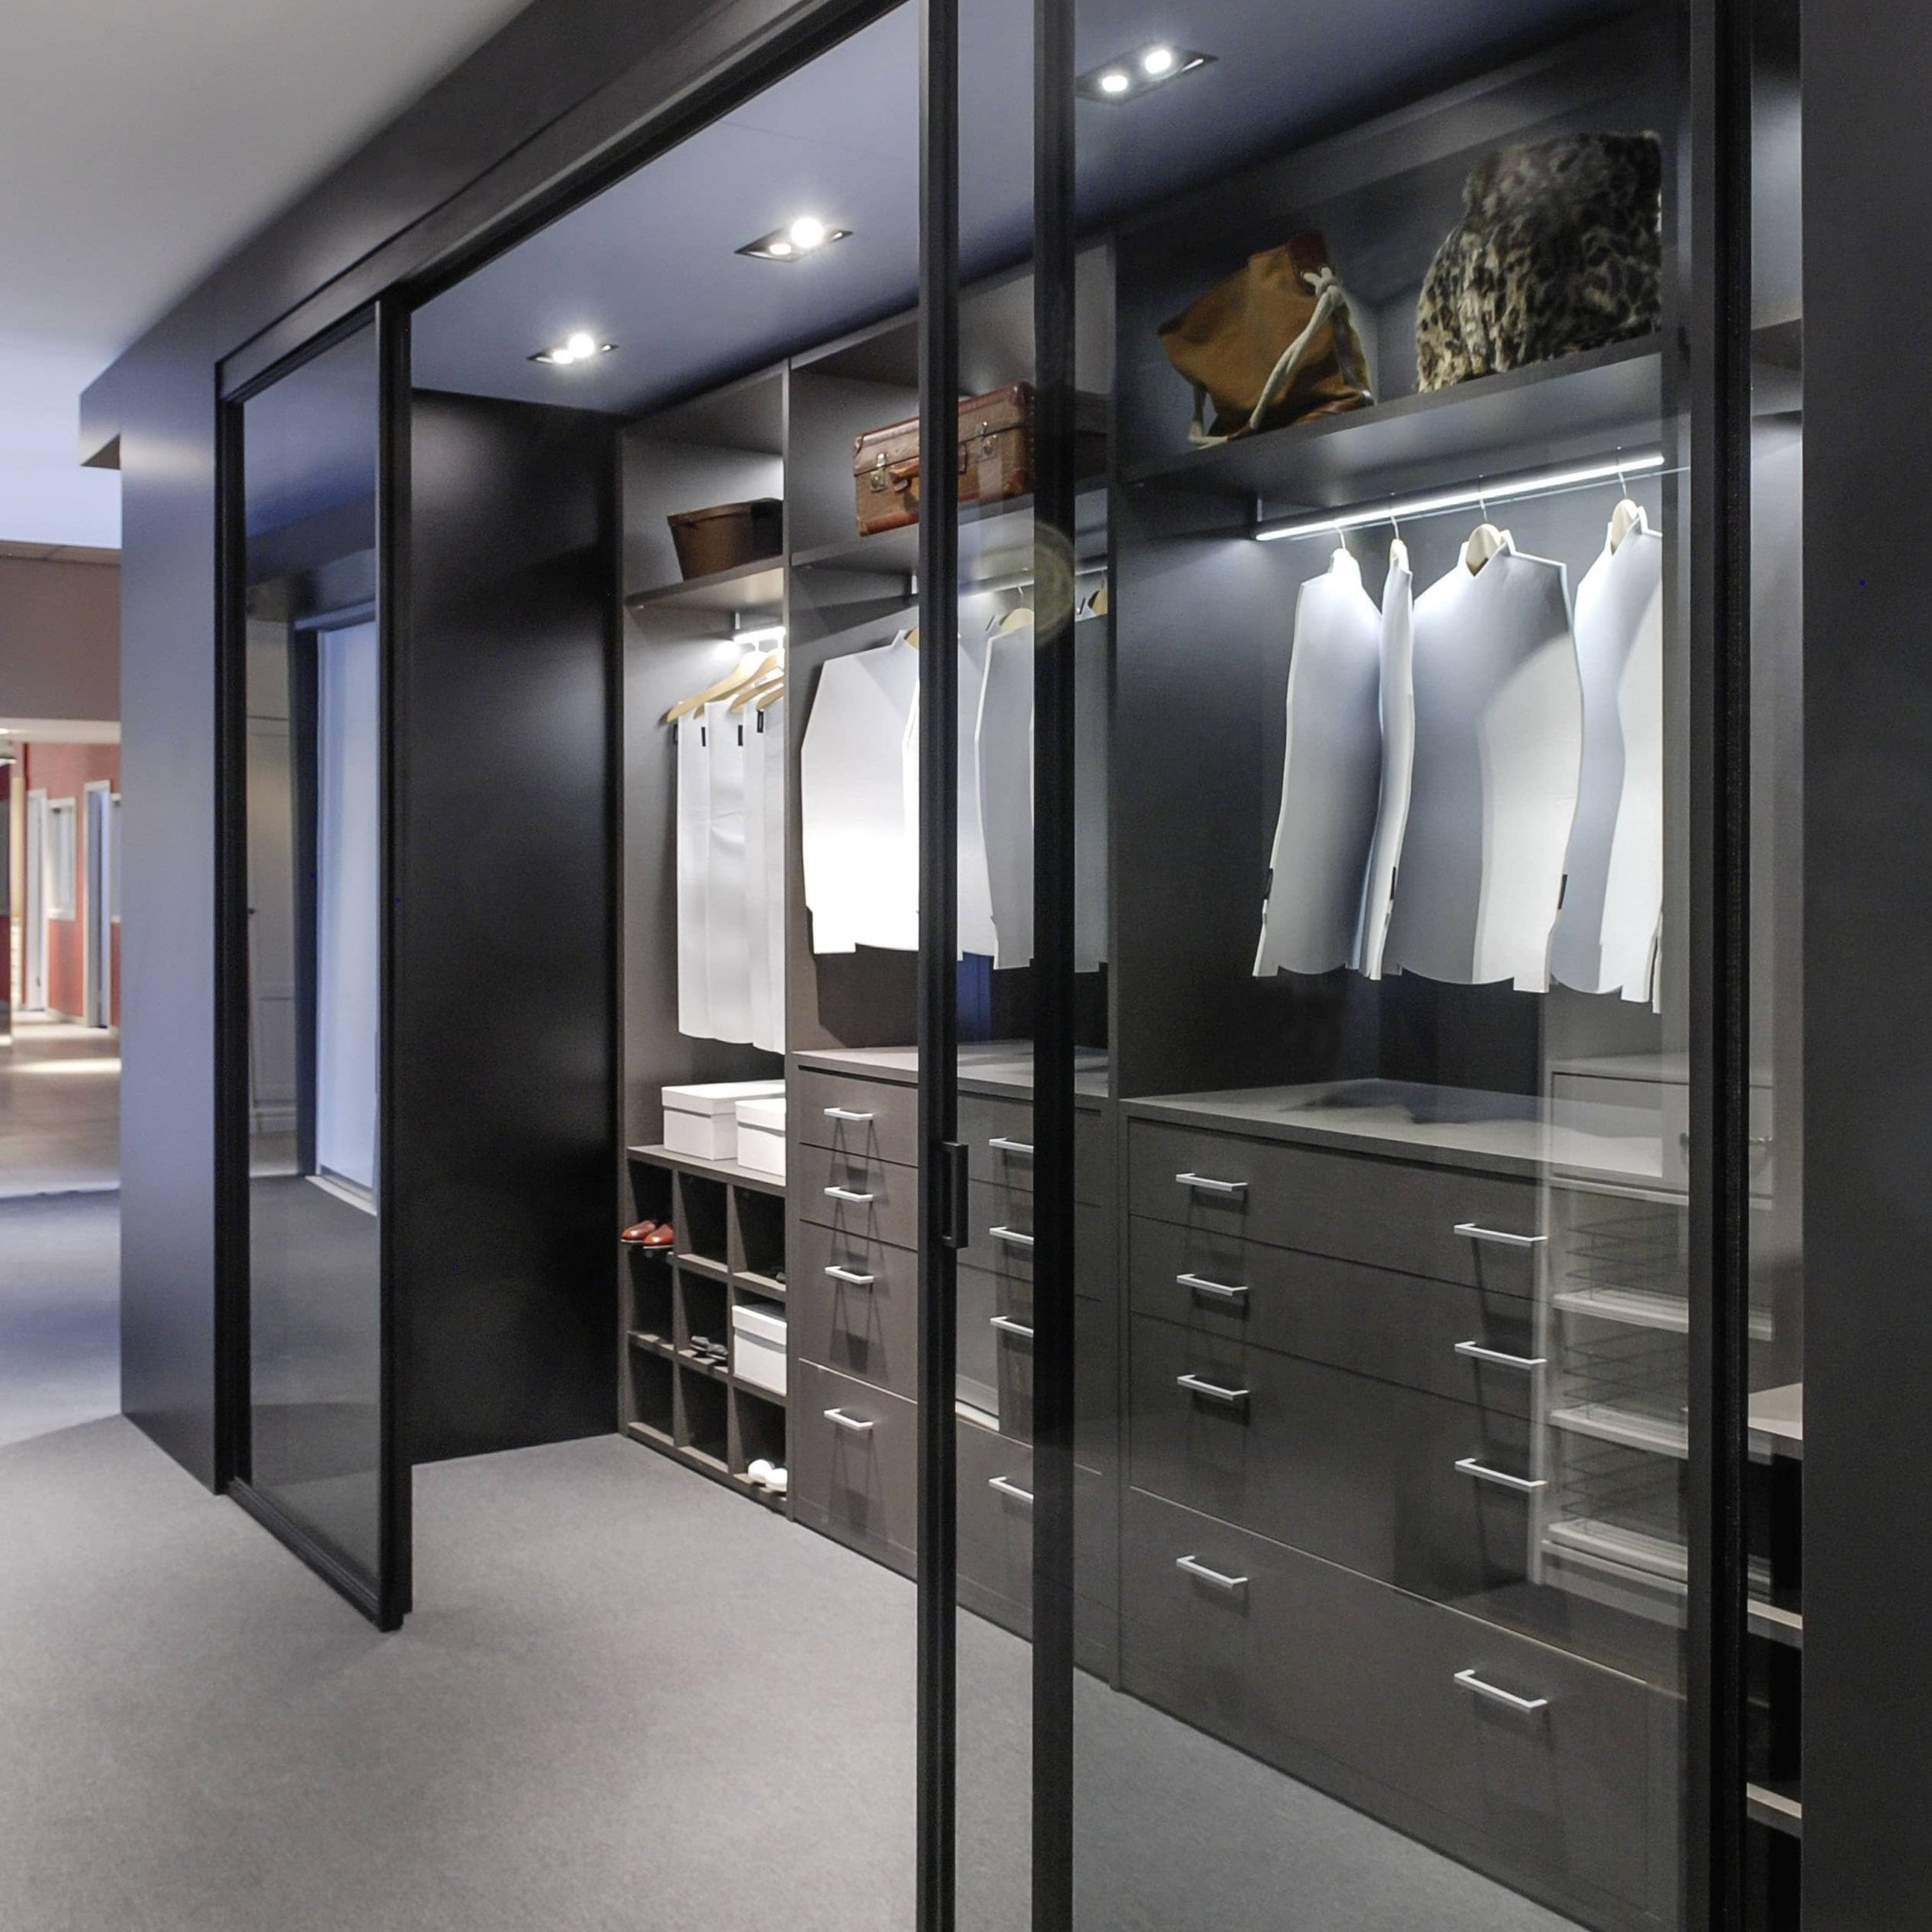 Amazing walk-in closet built-in cabinets with custom lighting showcasing  designer bags finished with glass-f…